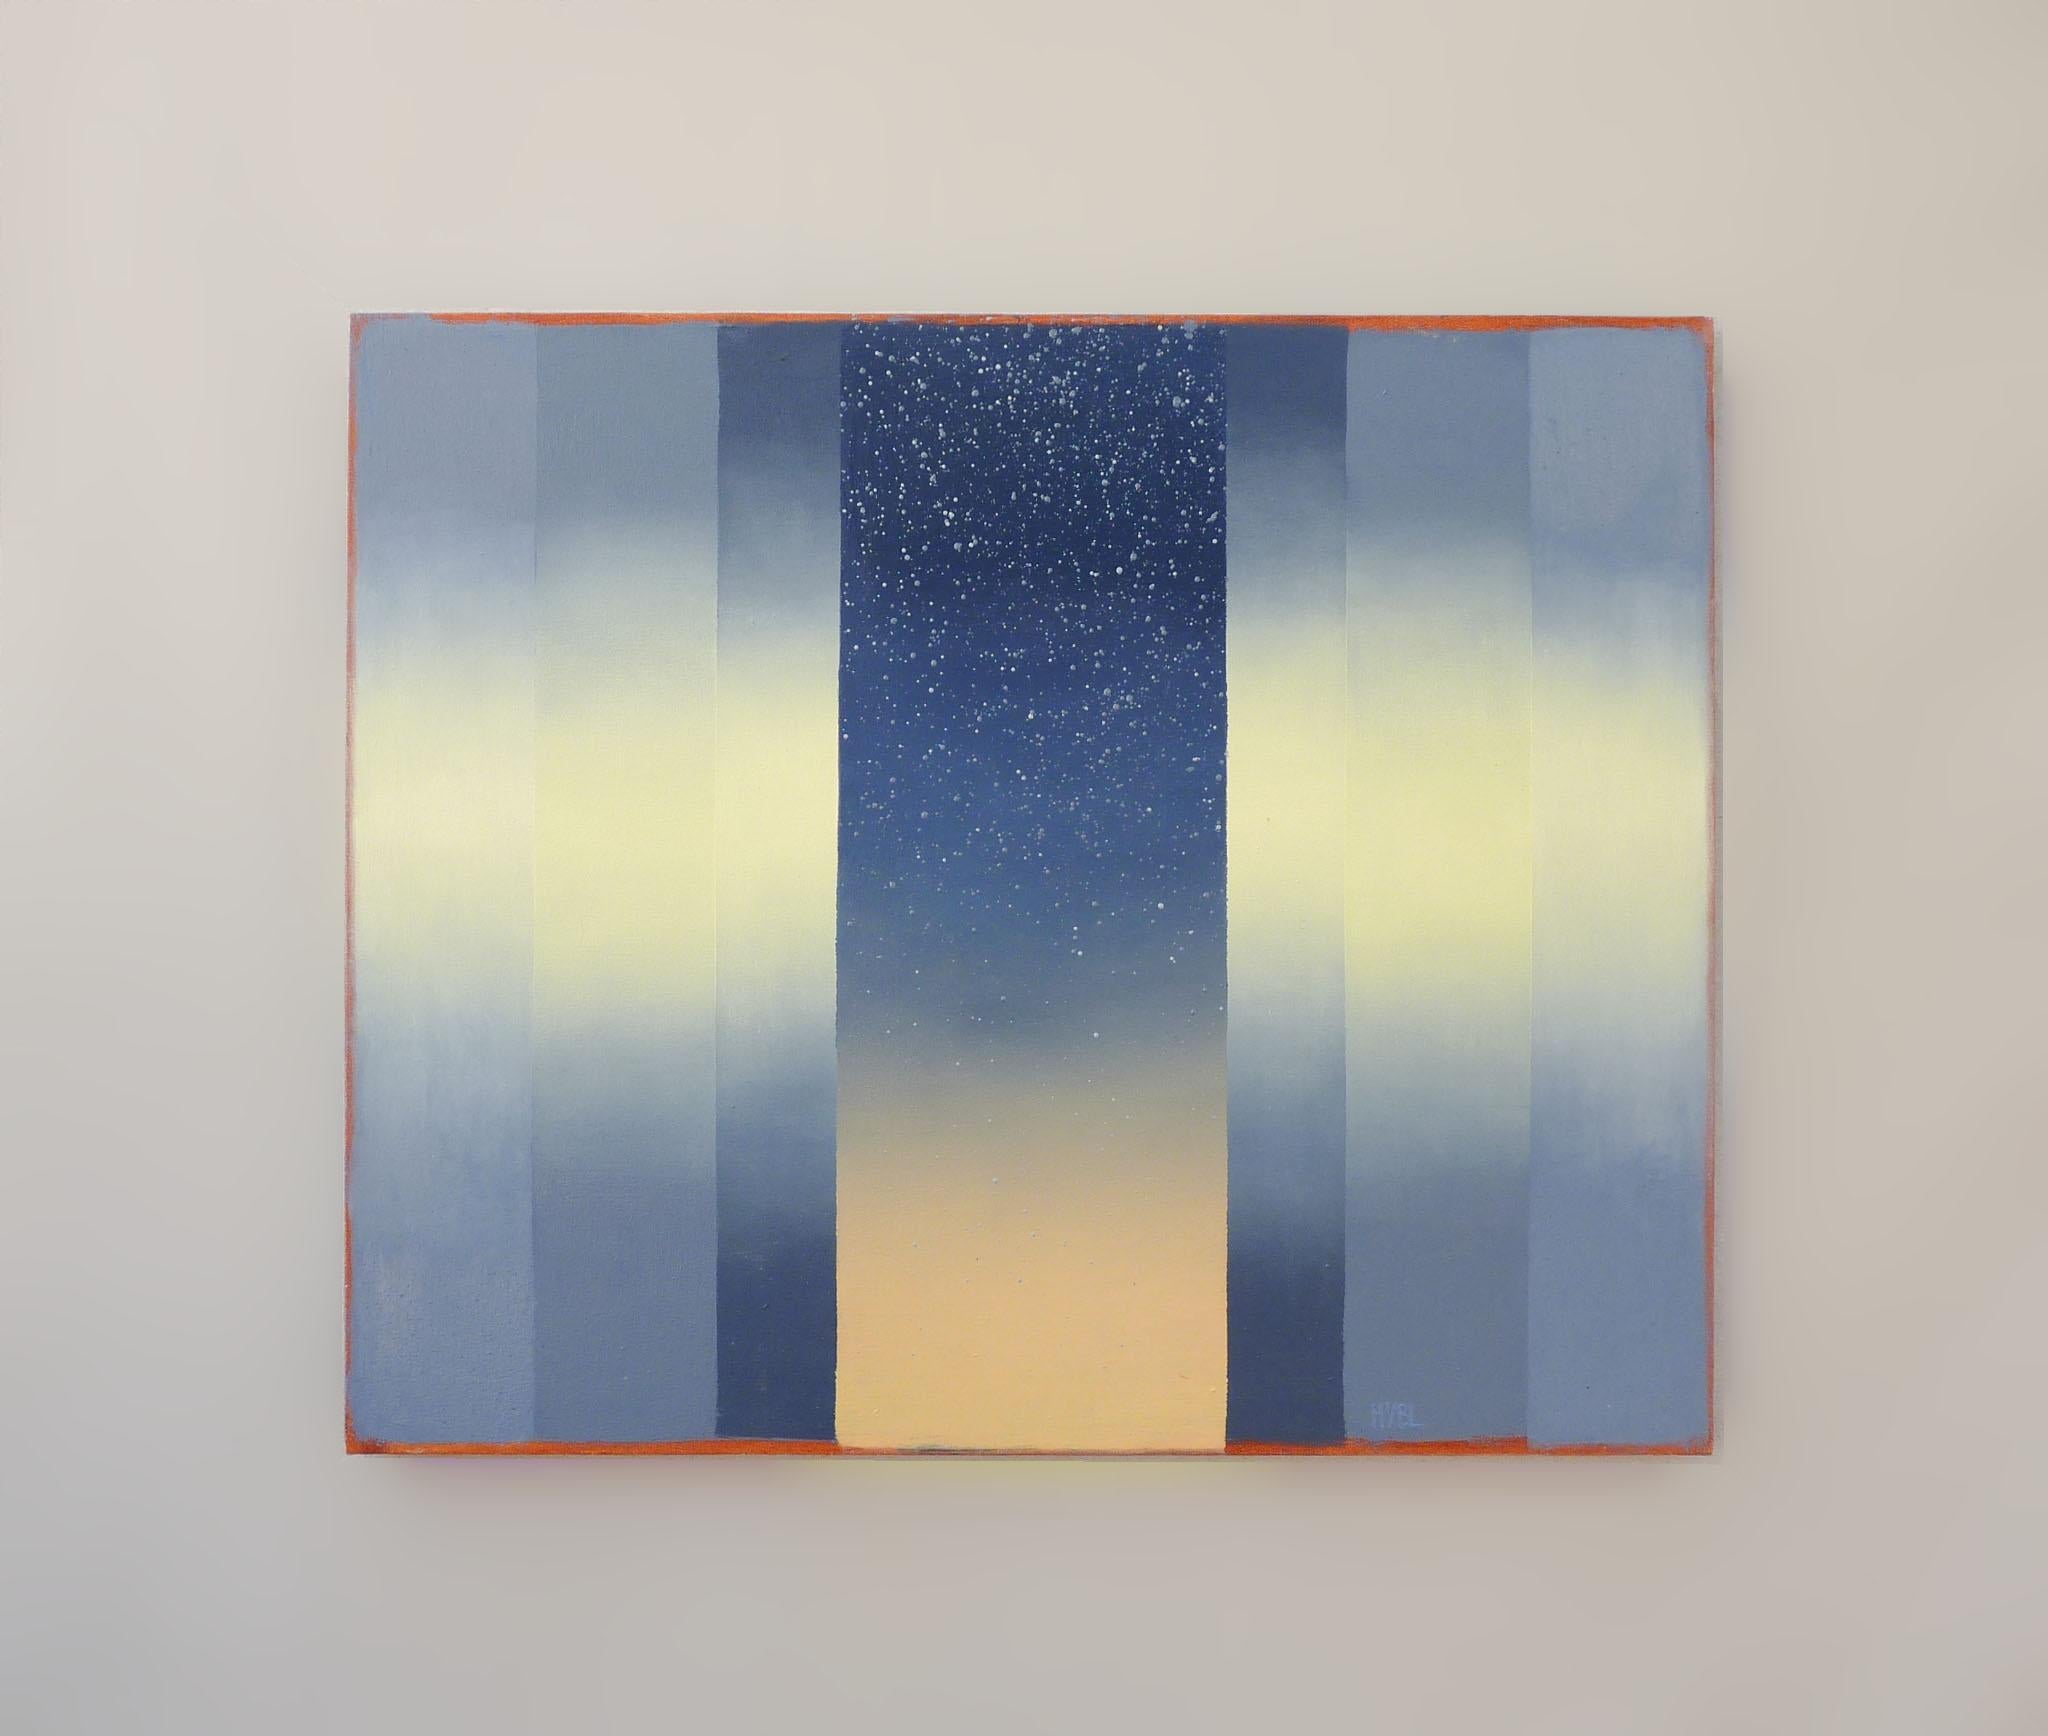 <p>Artist Comments<br>Living in a rural area, artist Heidi Hybl revels in the spectacular view of a starry night. She paints a contemporary abstract of the glorious deep blue sky. Heidi uses geometry to depict the cosmic scene cycling in different